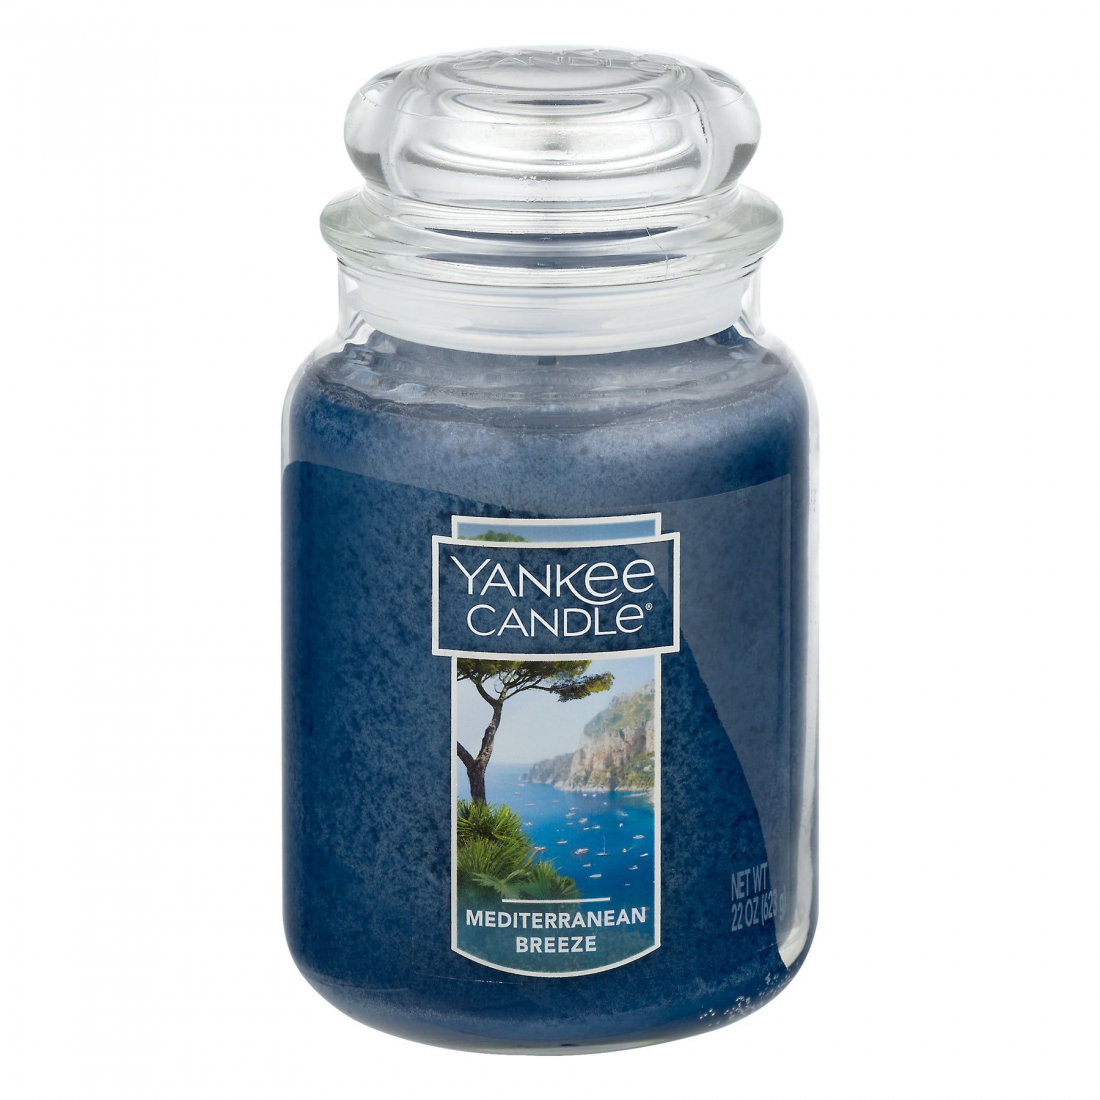 'Mediterranean Breeze' Scented Candle - 623 g